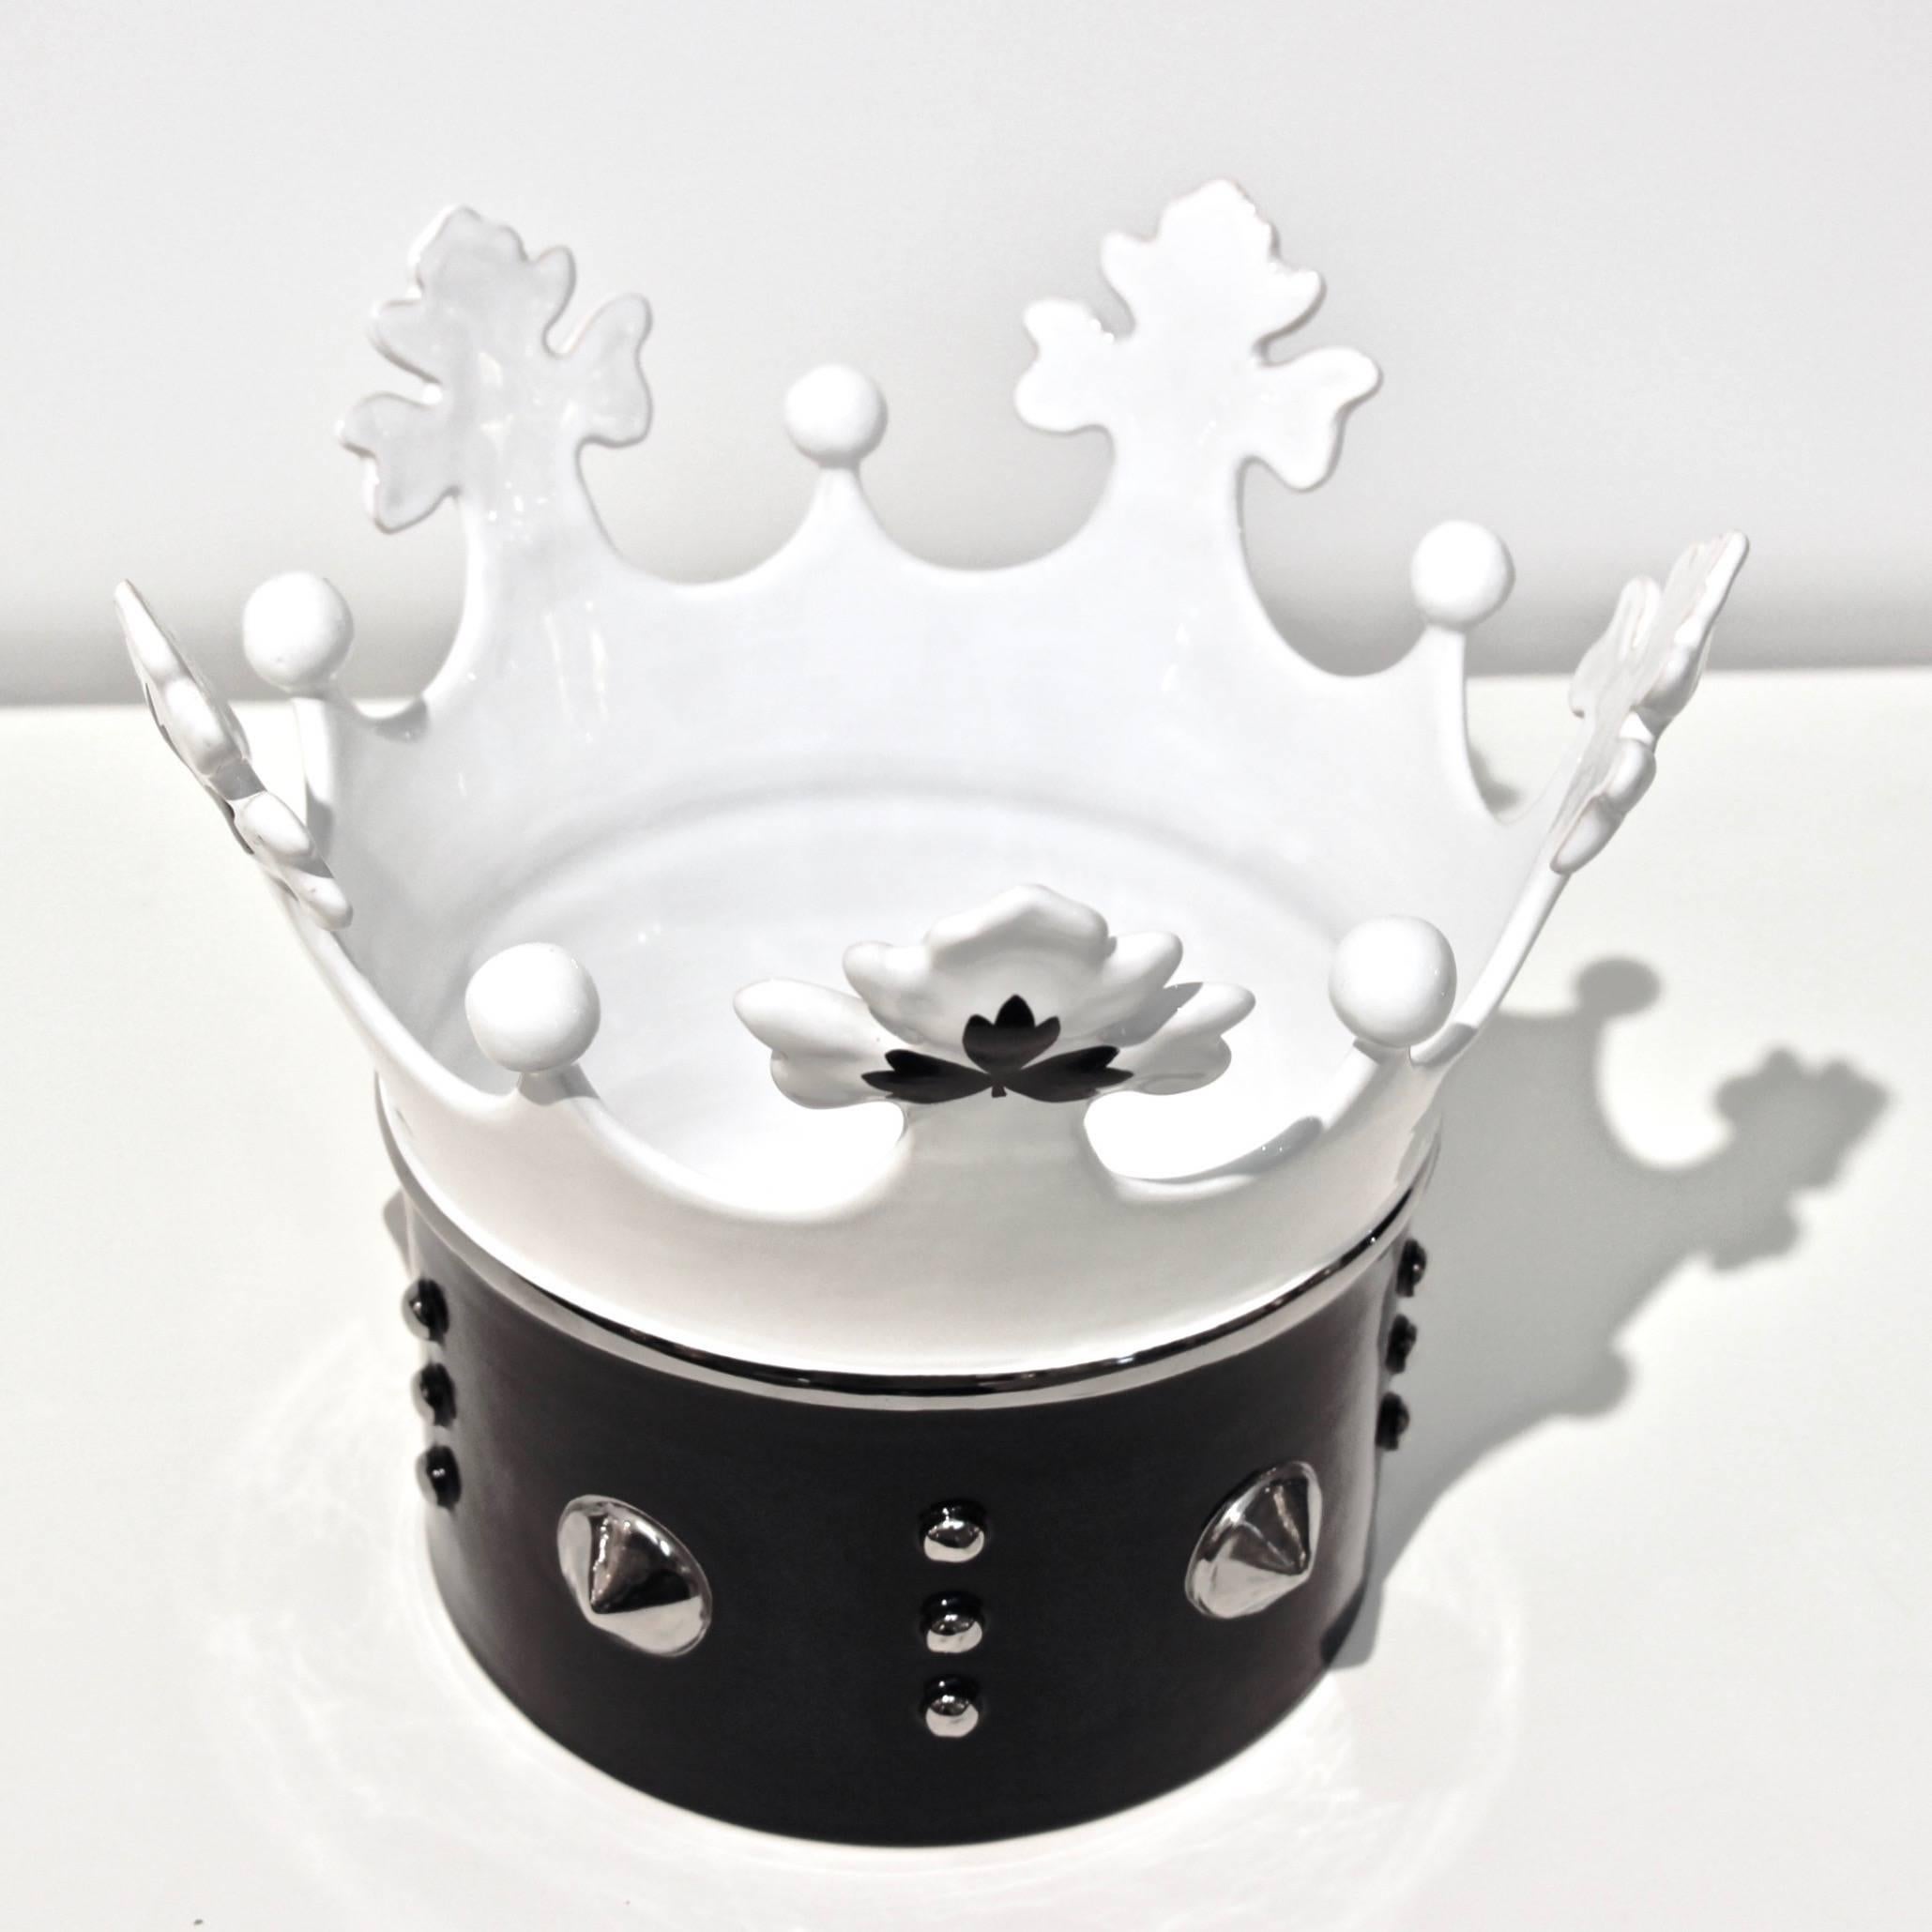 Contemporary handmade Italian work of art, a bowl in the shape of a crown in majolica by Ceramica Gatti, a long tradition studio and famous designer Ettore Sottsass' favorite. This Art Deco style piece is hand enameled in black and white and